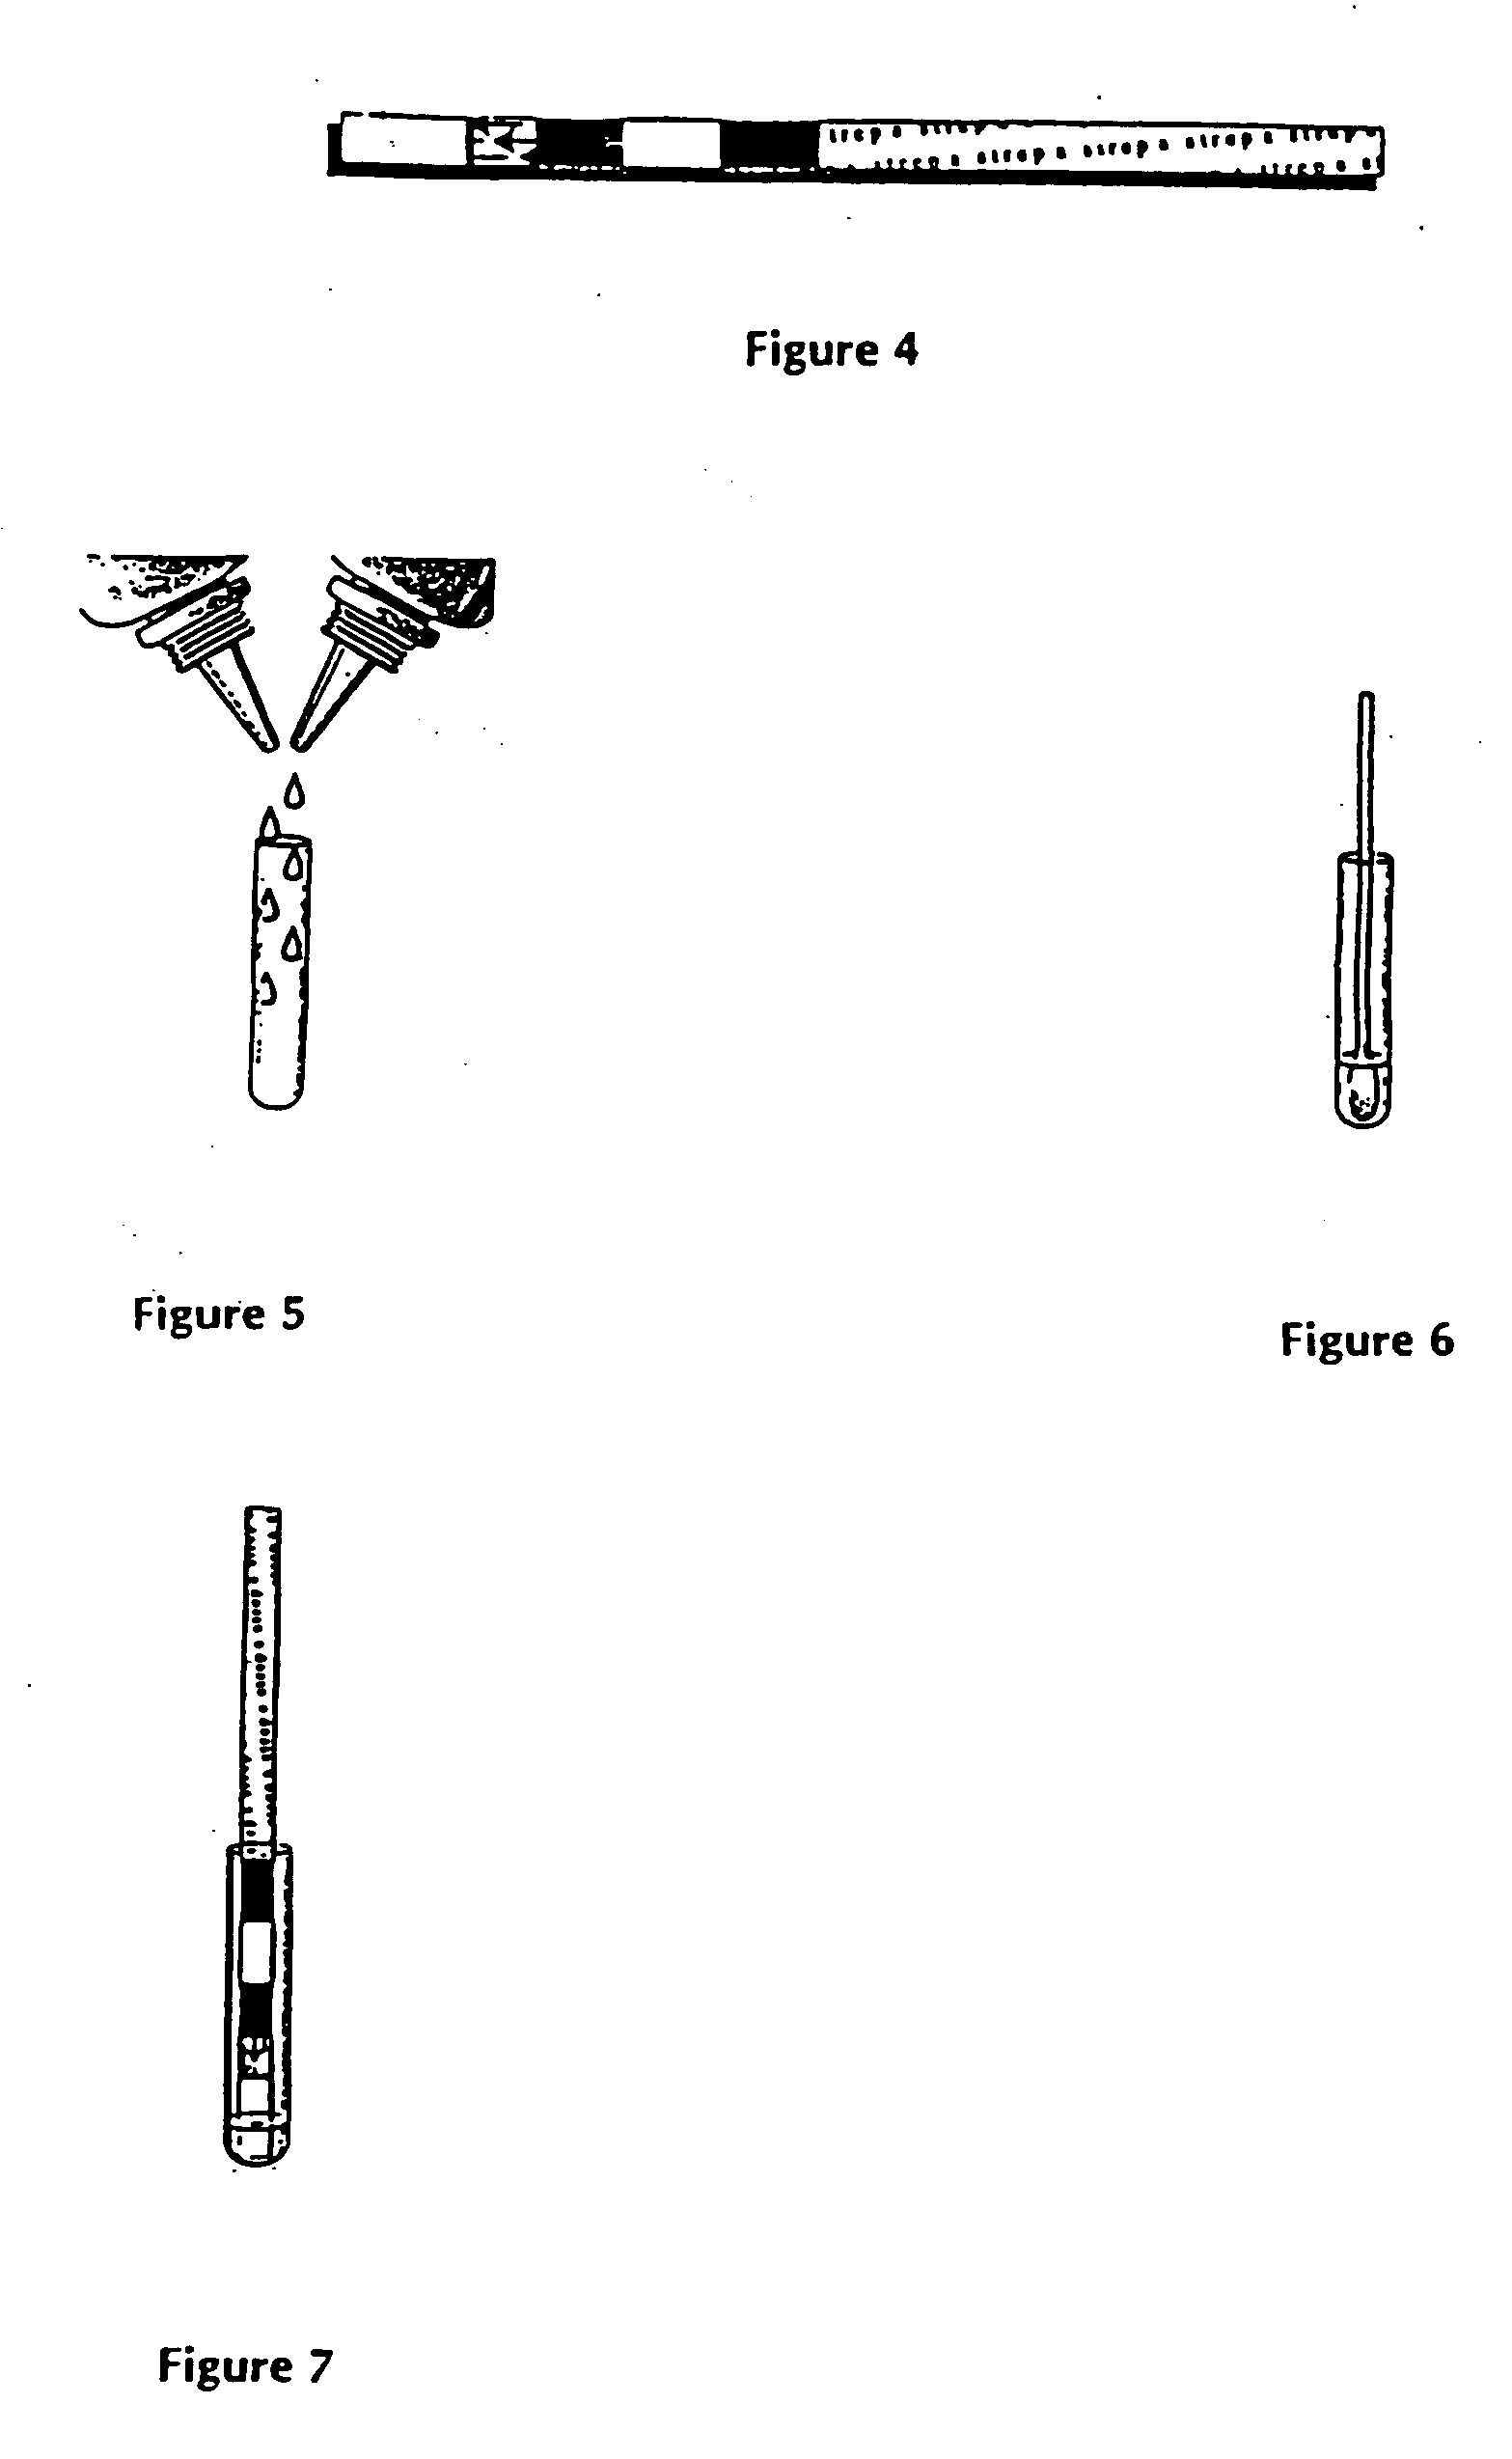 Methods of use of one step immunochromatographic device for streptococcus a antigen